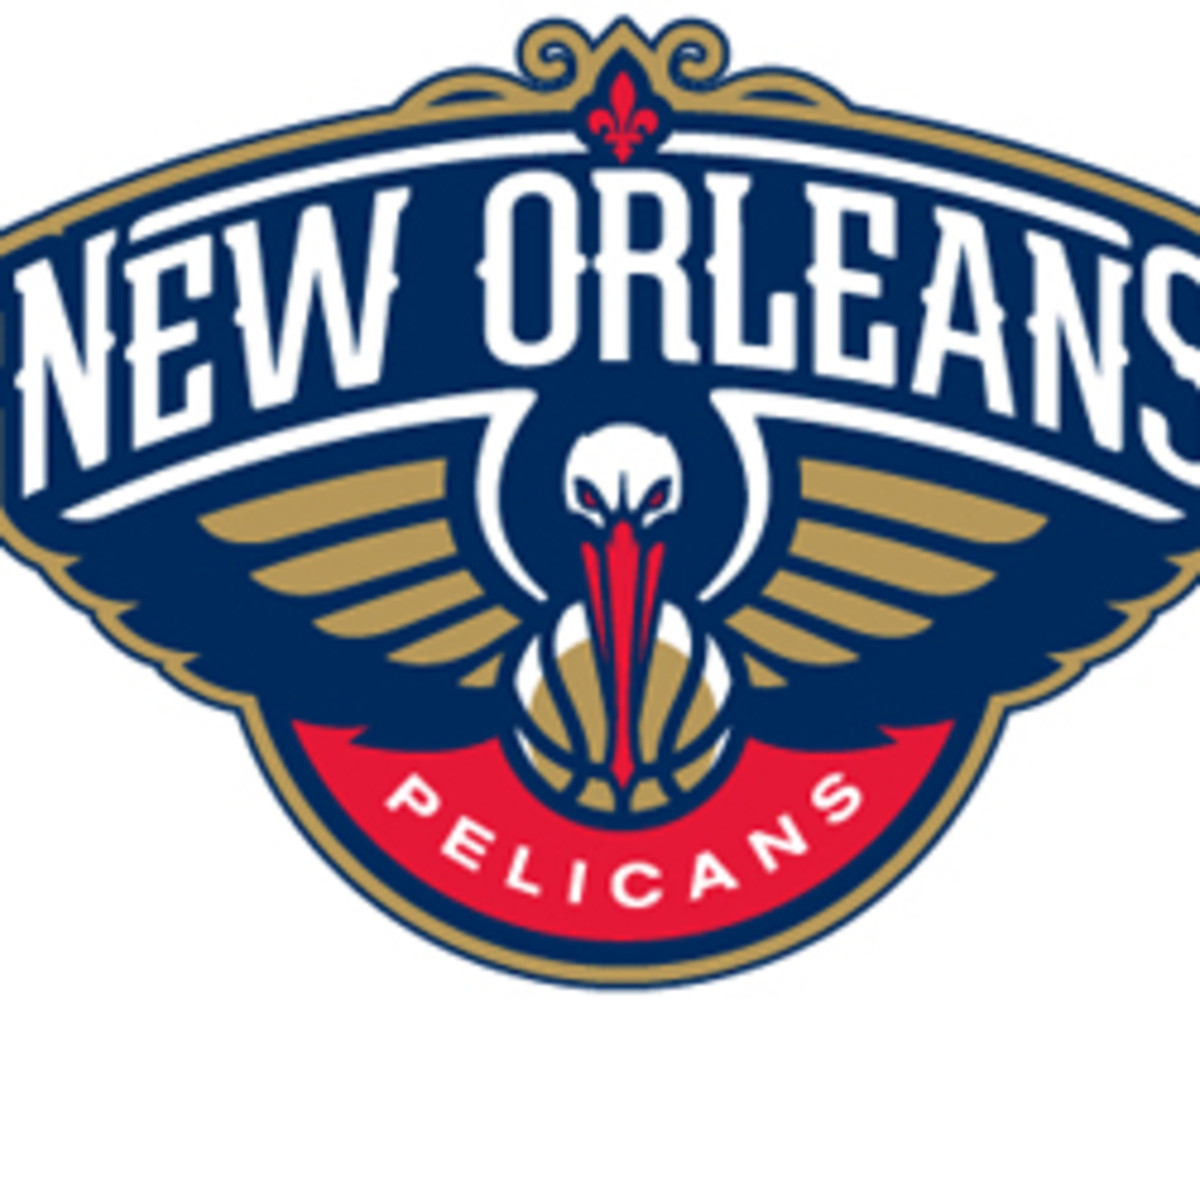 The New Orleans Hornets released a new team name -- Pelicans -- and team marks. (NBA.com)